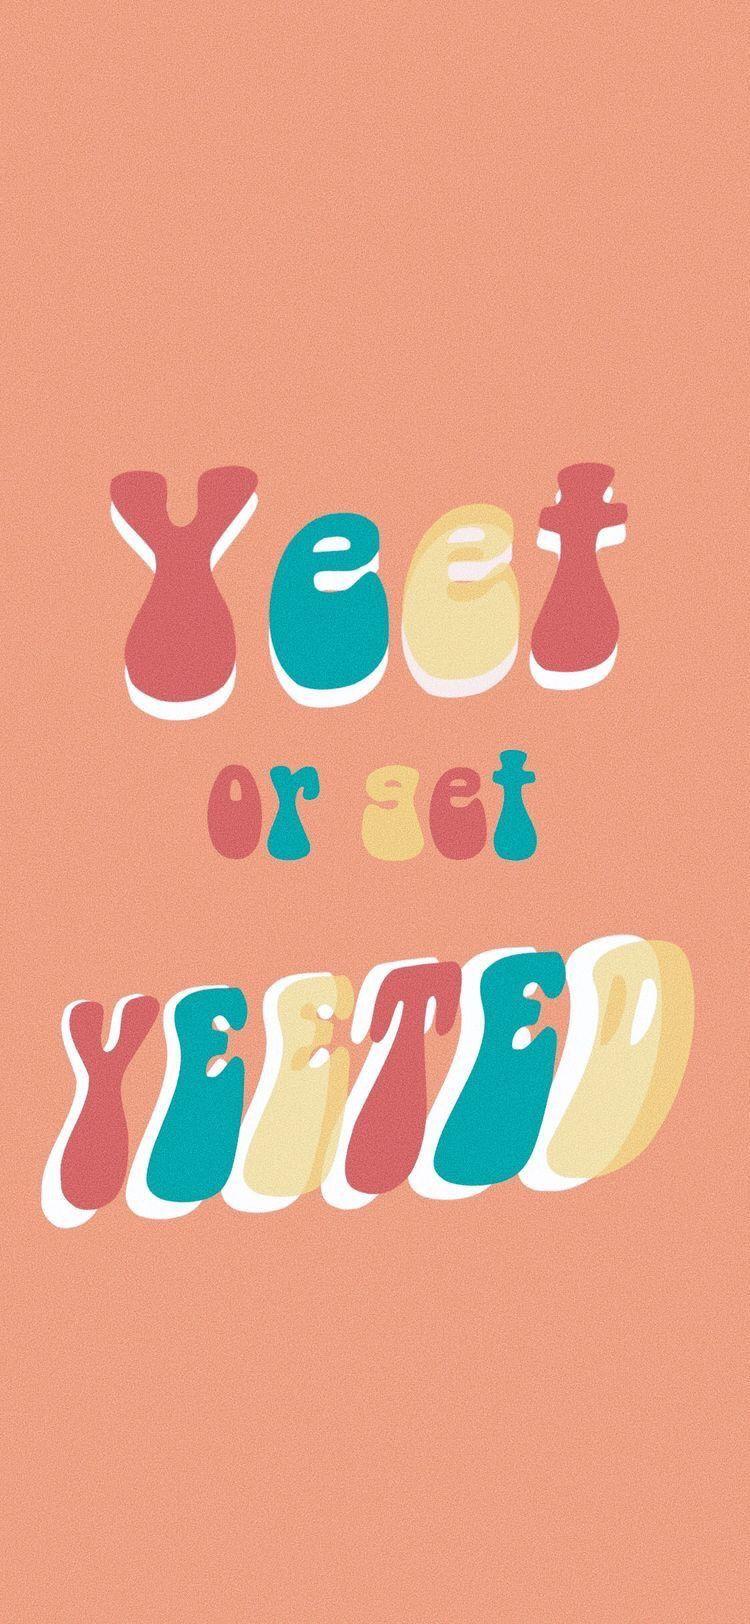 YEET ! YOINK!. Wallpaper. Wallpaper quotes, Cute quotes